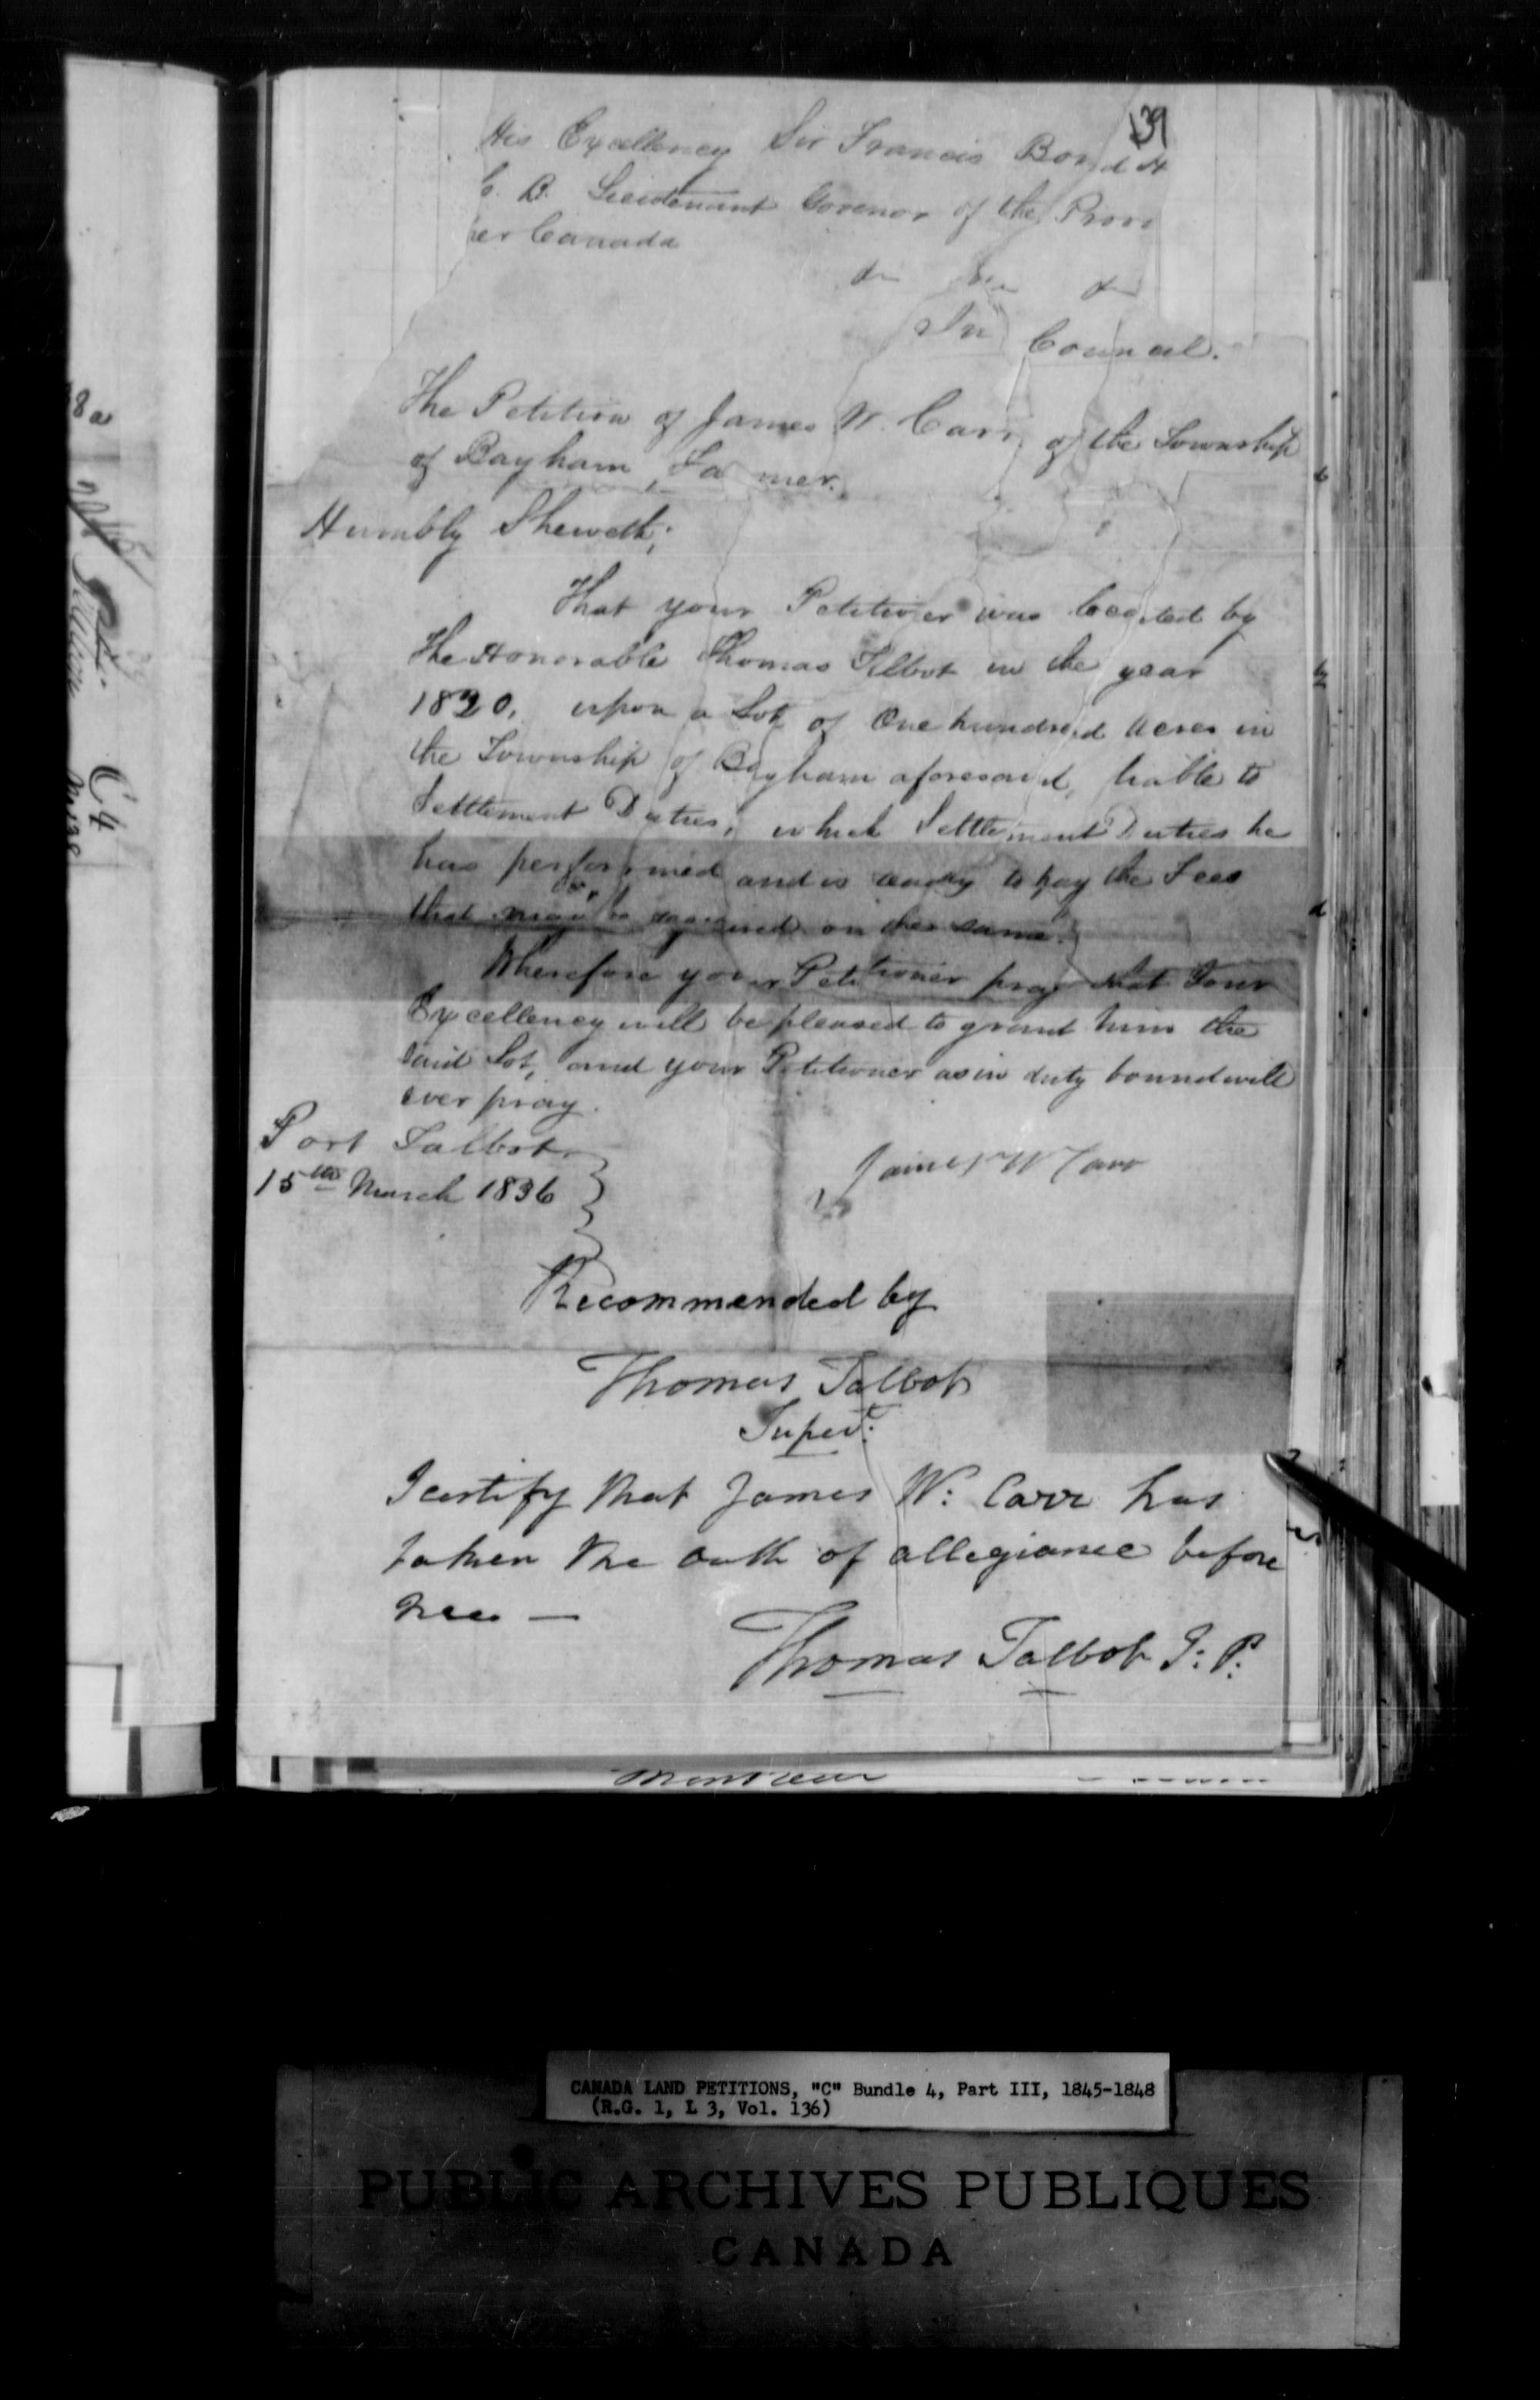 Title: Upper Canada Land Petitions (1763-1865) - Mikan Number: 205131 - Microform: c-1736